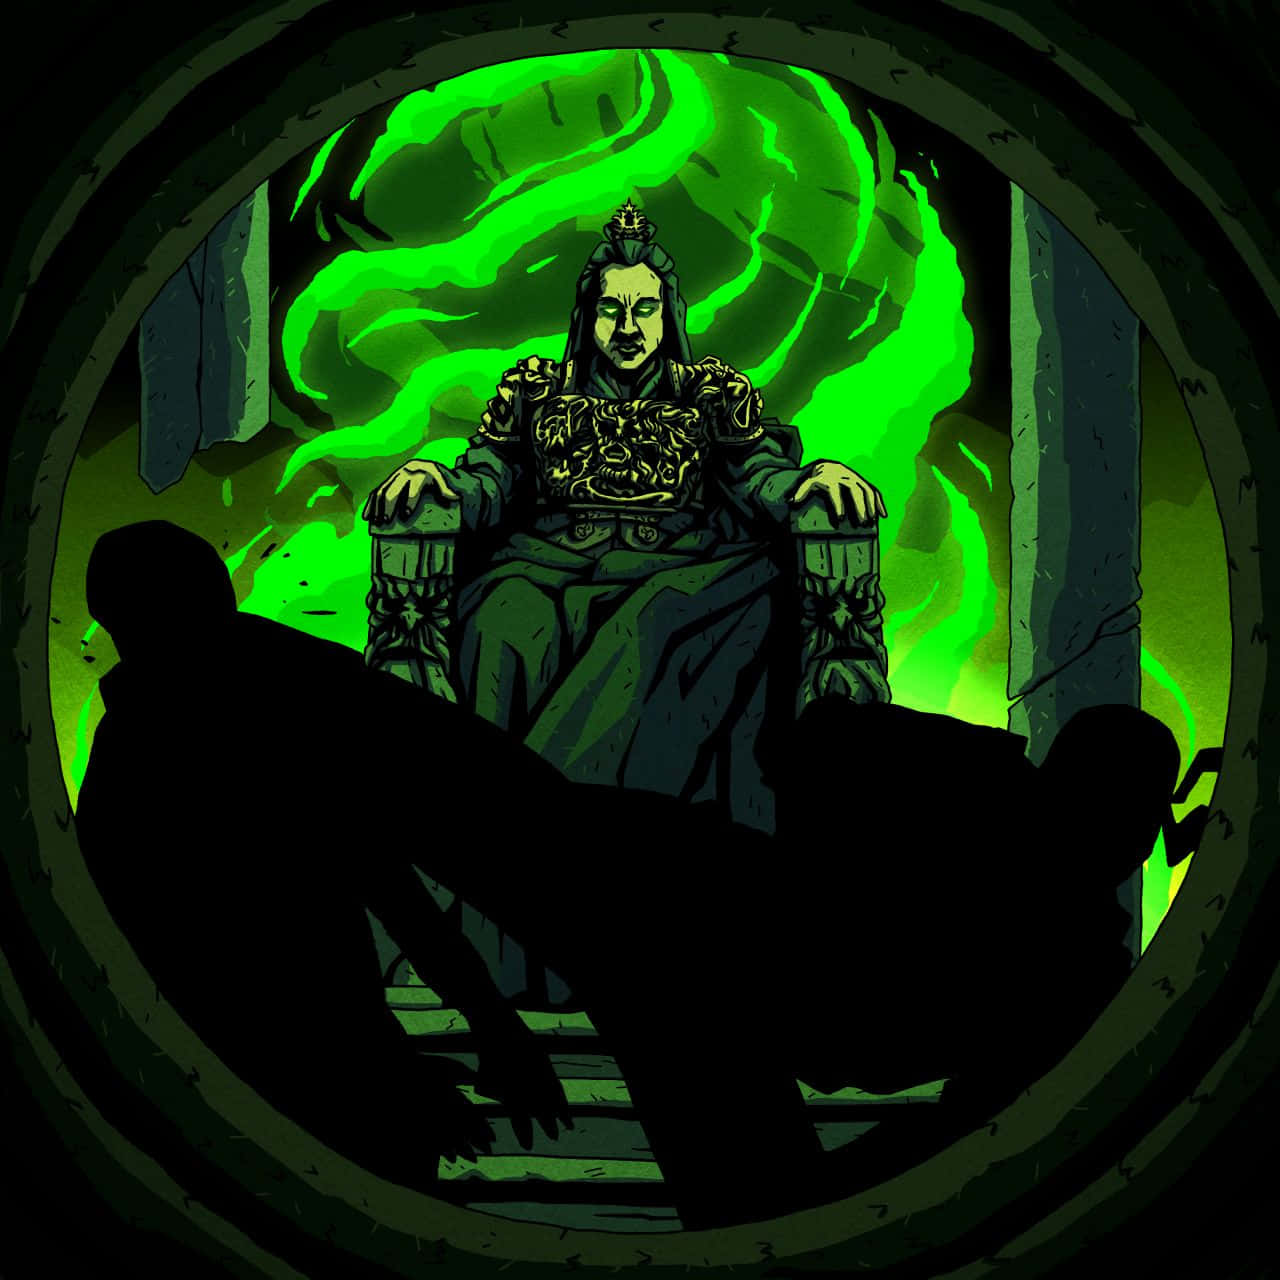 Shang Tsung casting a deadly spell in the Mortal Kombat Universe Wallpaper